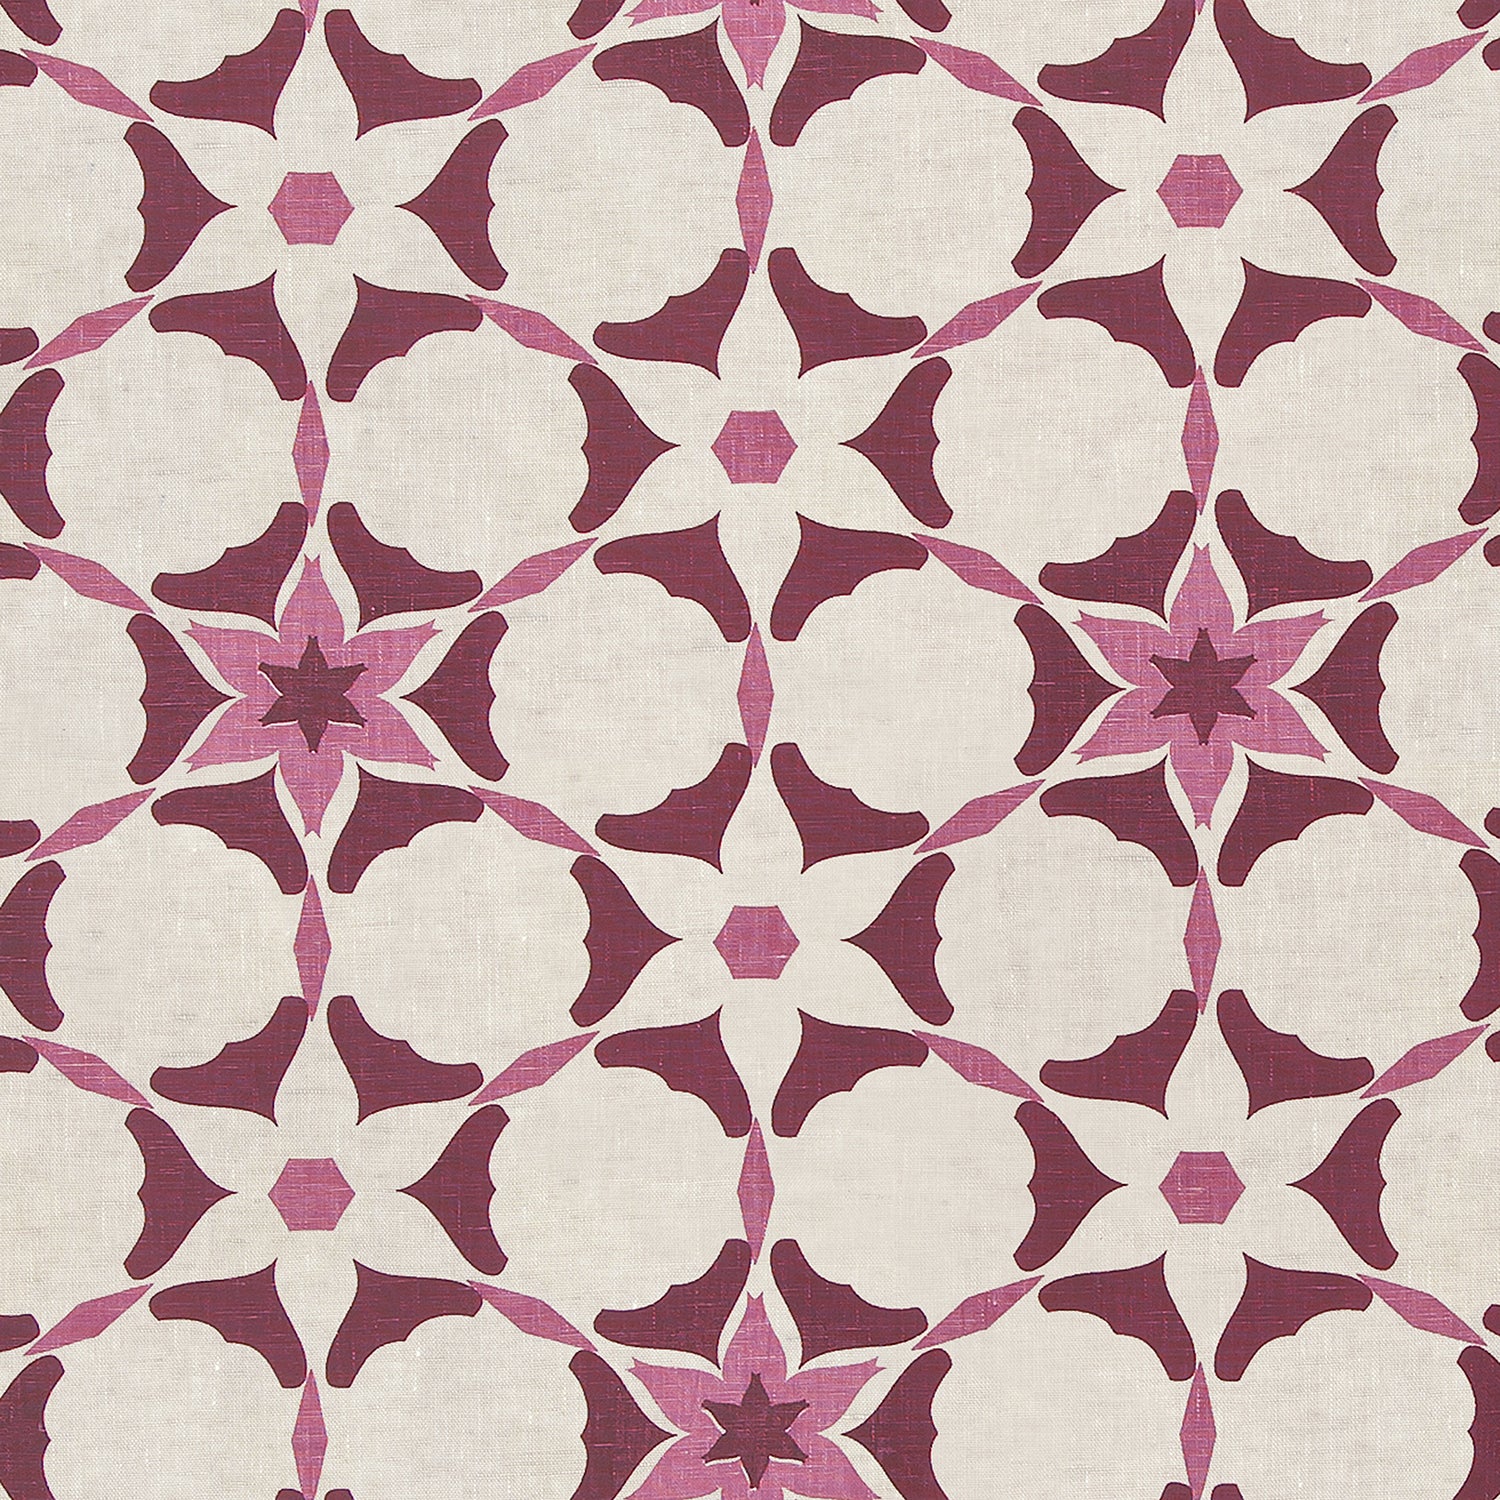 Detail of fabric in a geometric star print in shades of pink and maroon on a cream field.